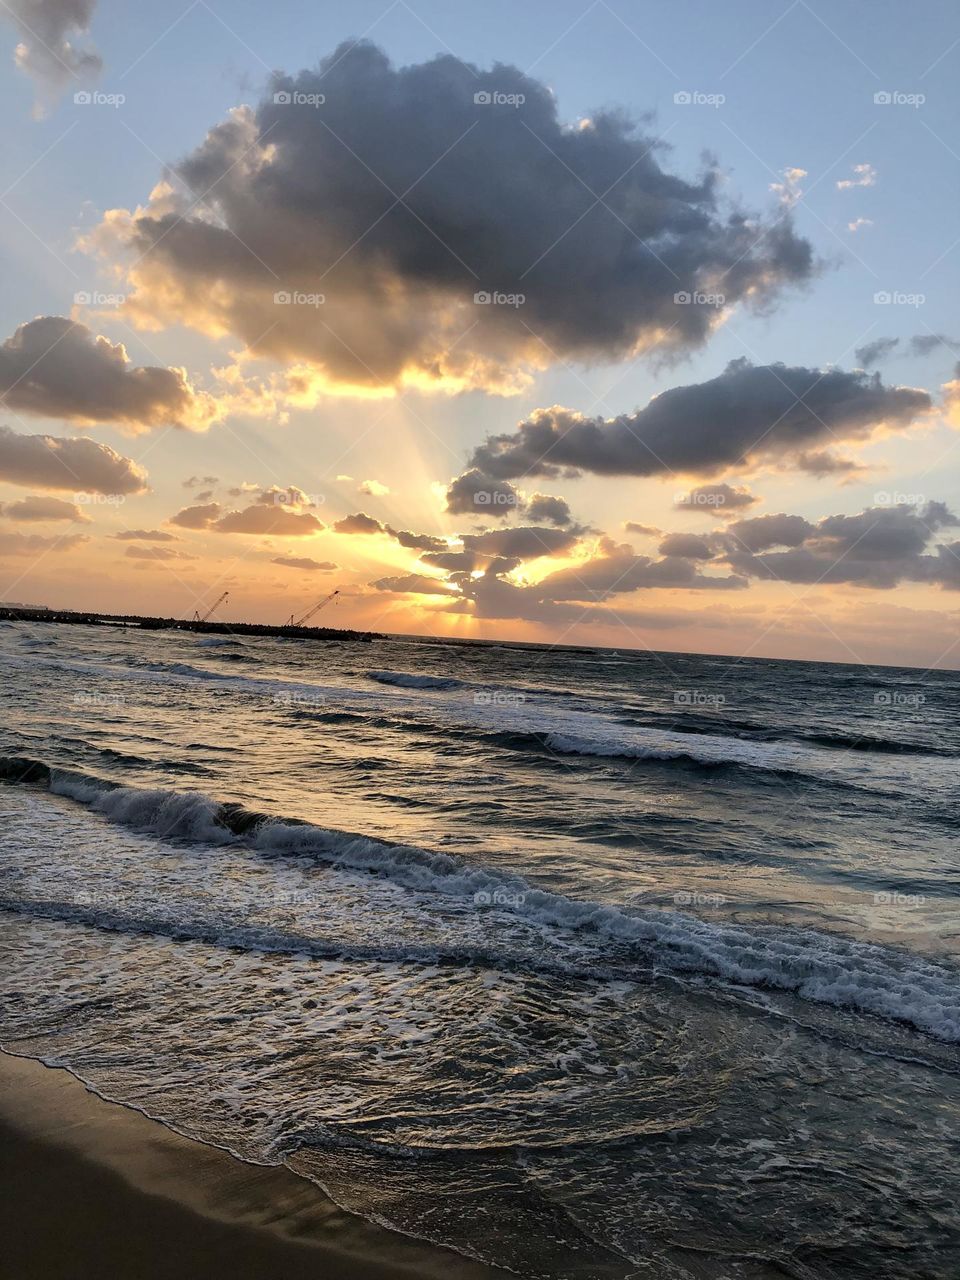 Sunset with clouds in the sky of Alexandria